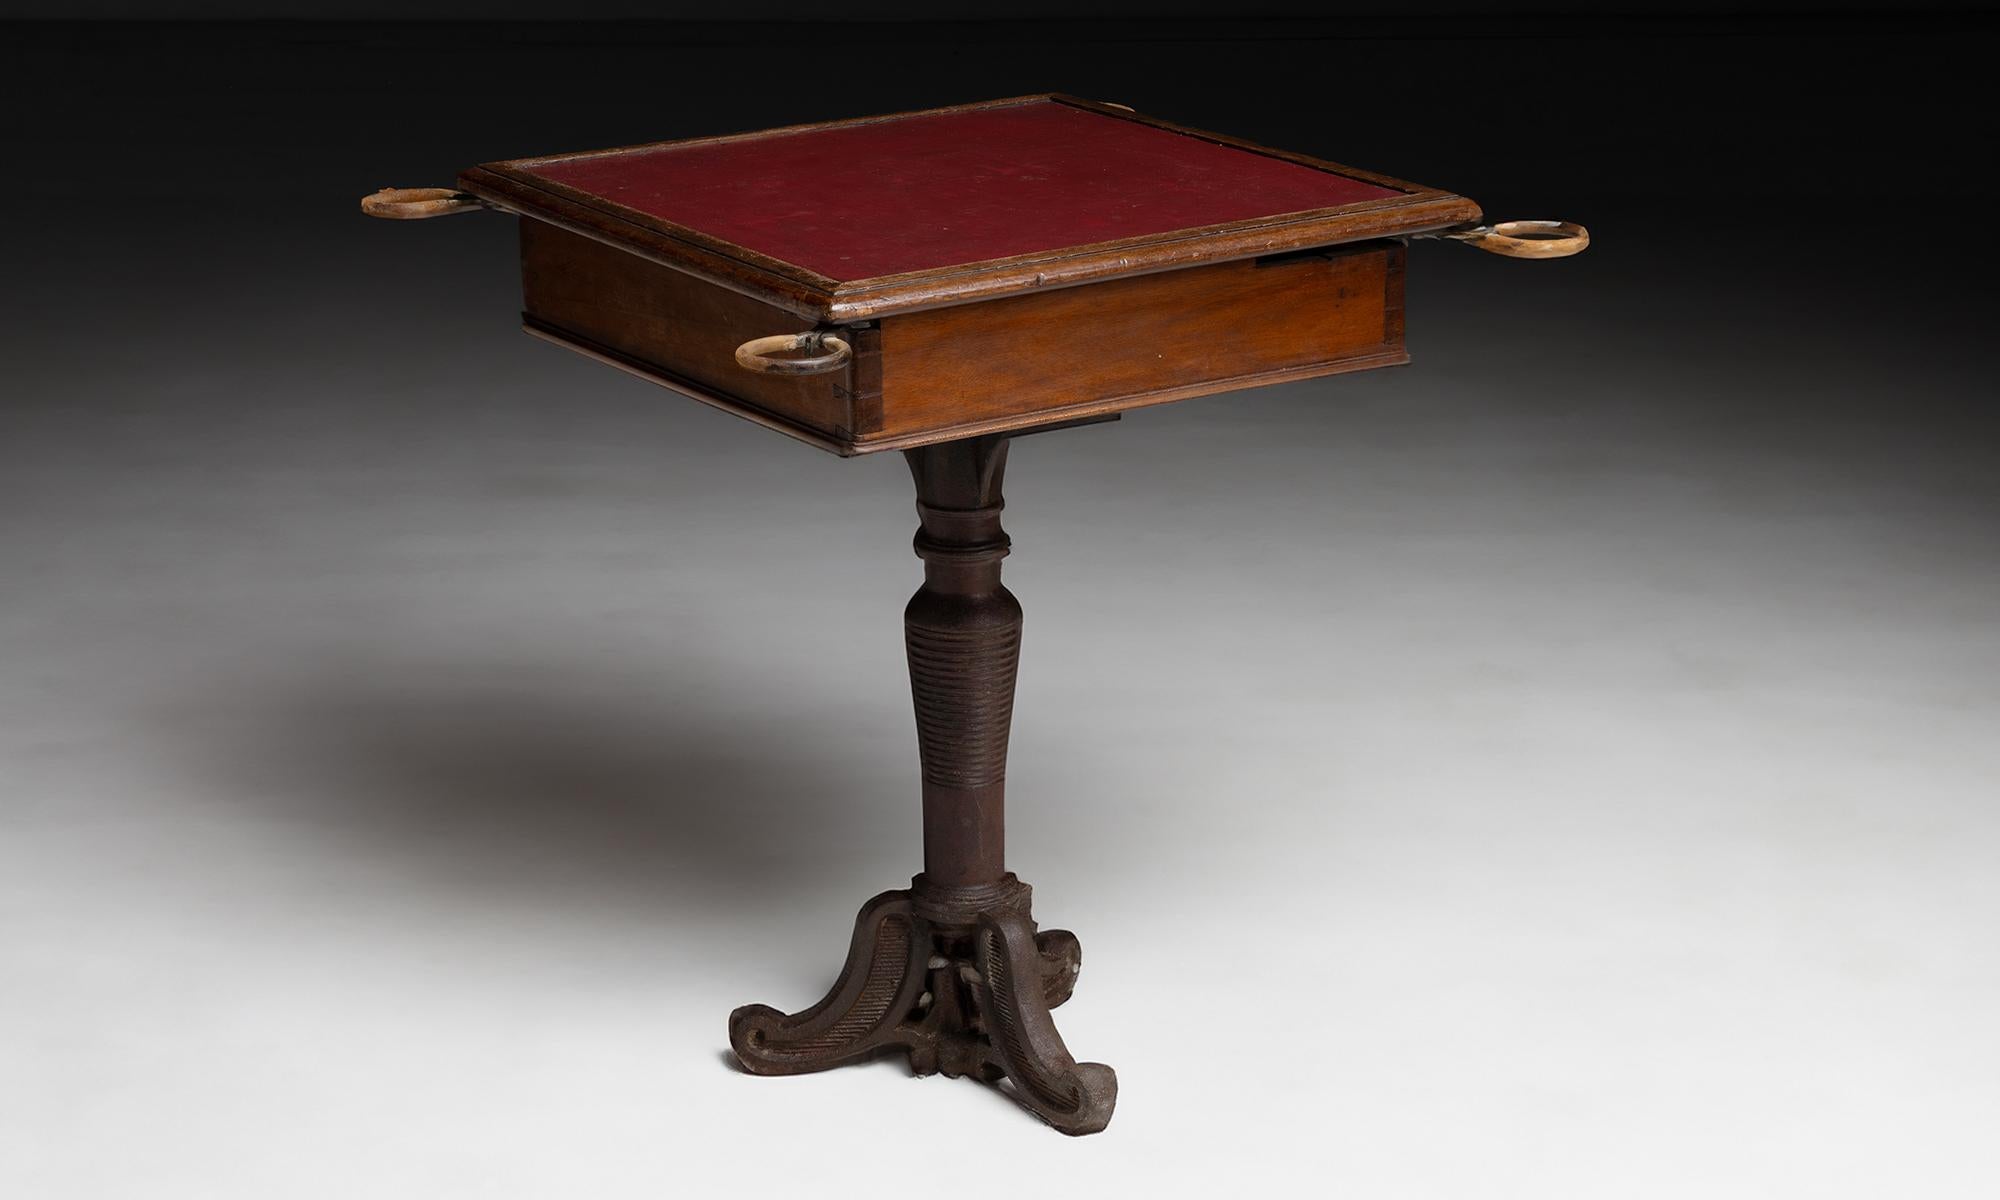 Mahogany Ships Table

England circa 1900

Square mahogany table with fold out holders for drinks or gaming chips. The table top is inset with faux leather on a cast iron base.

29”w x 28.5”d x 30”h